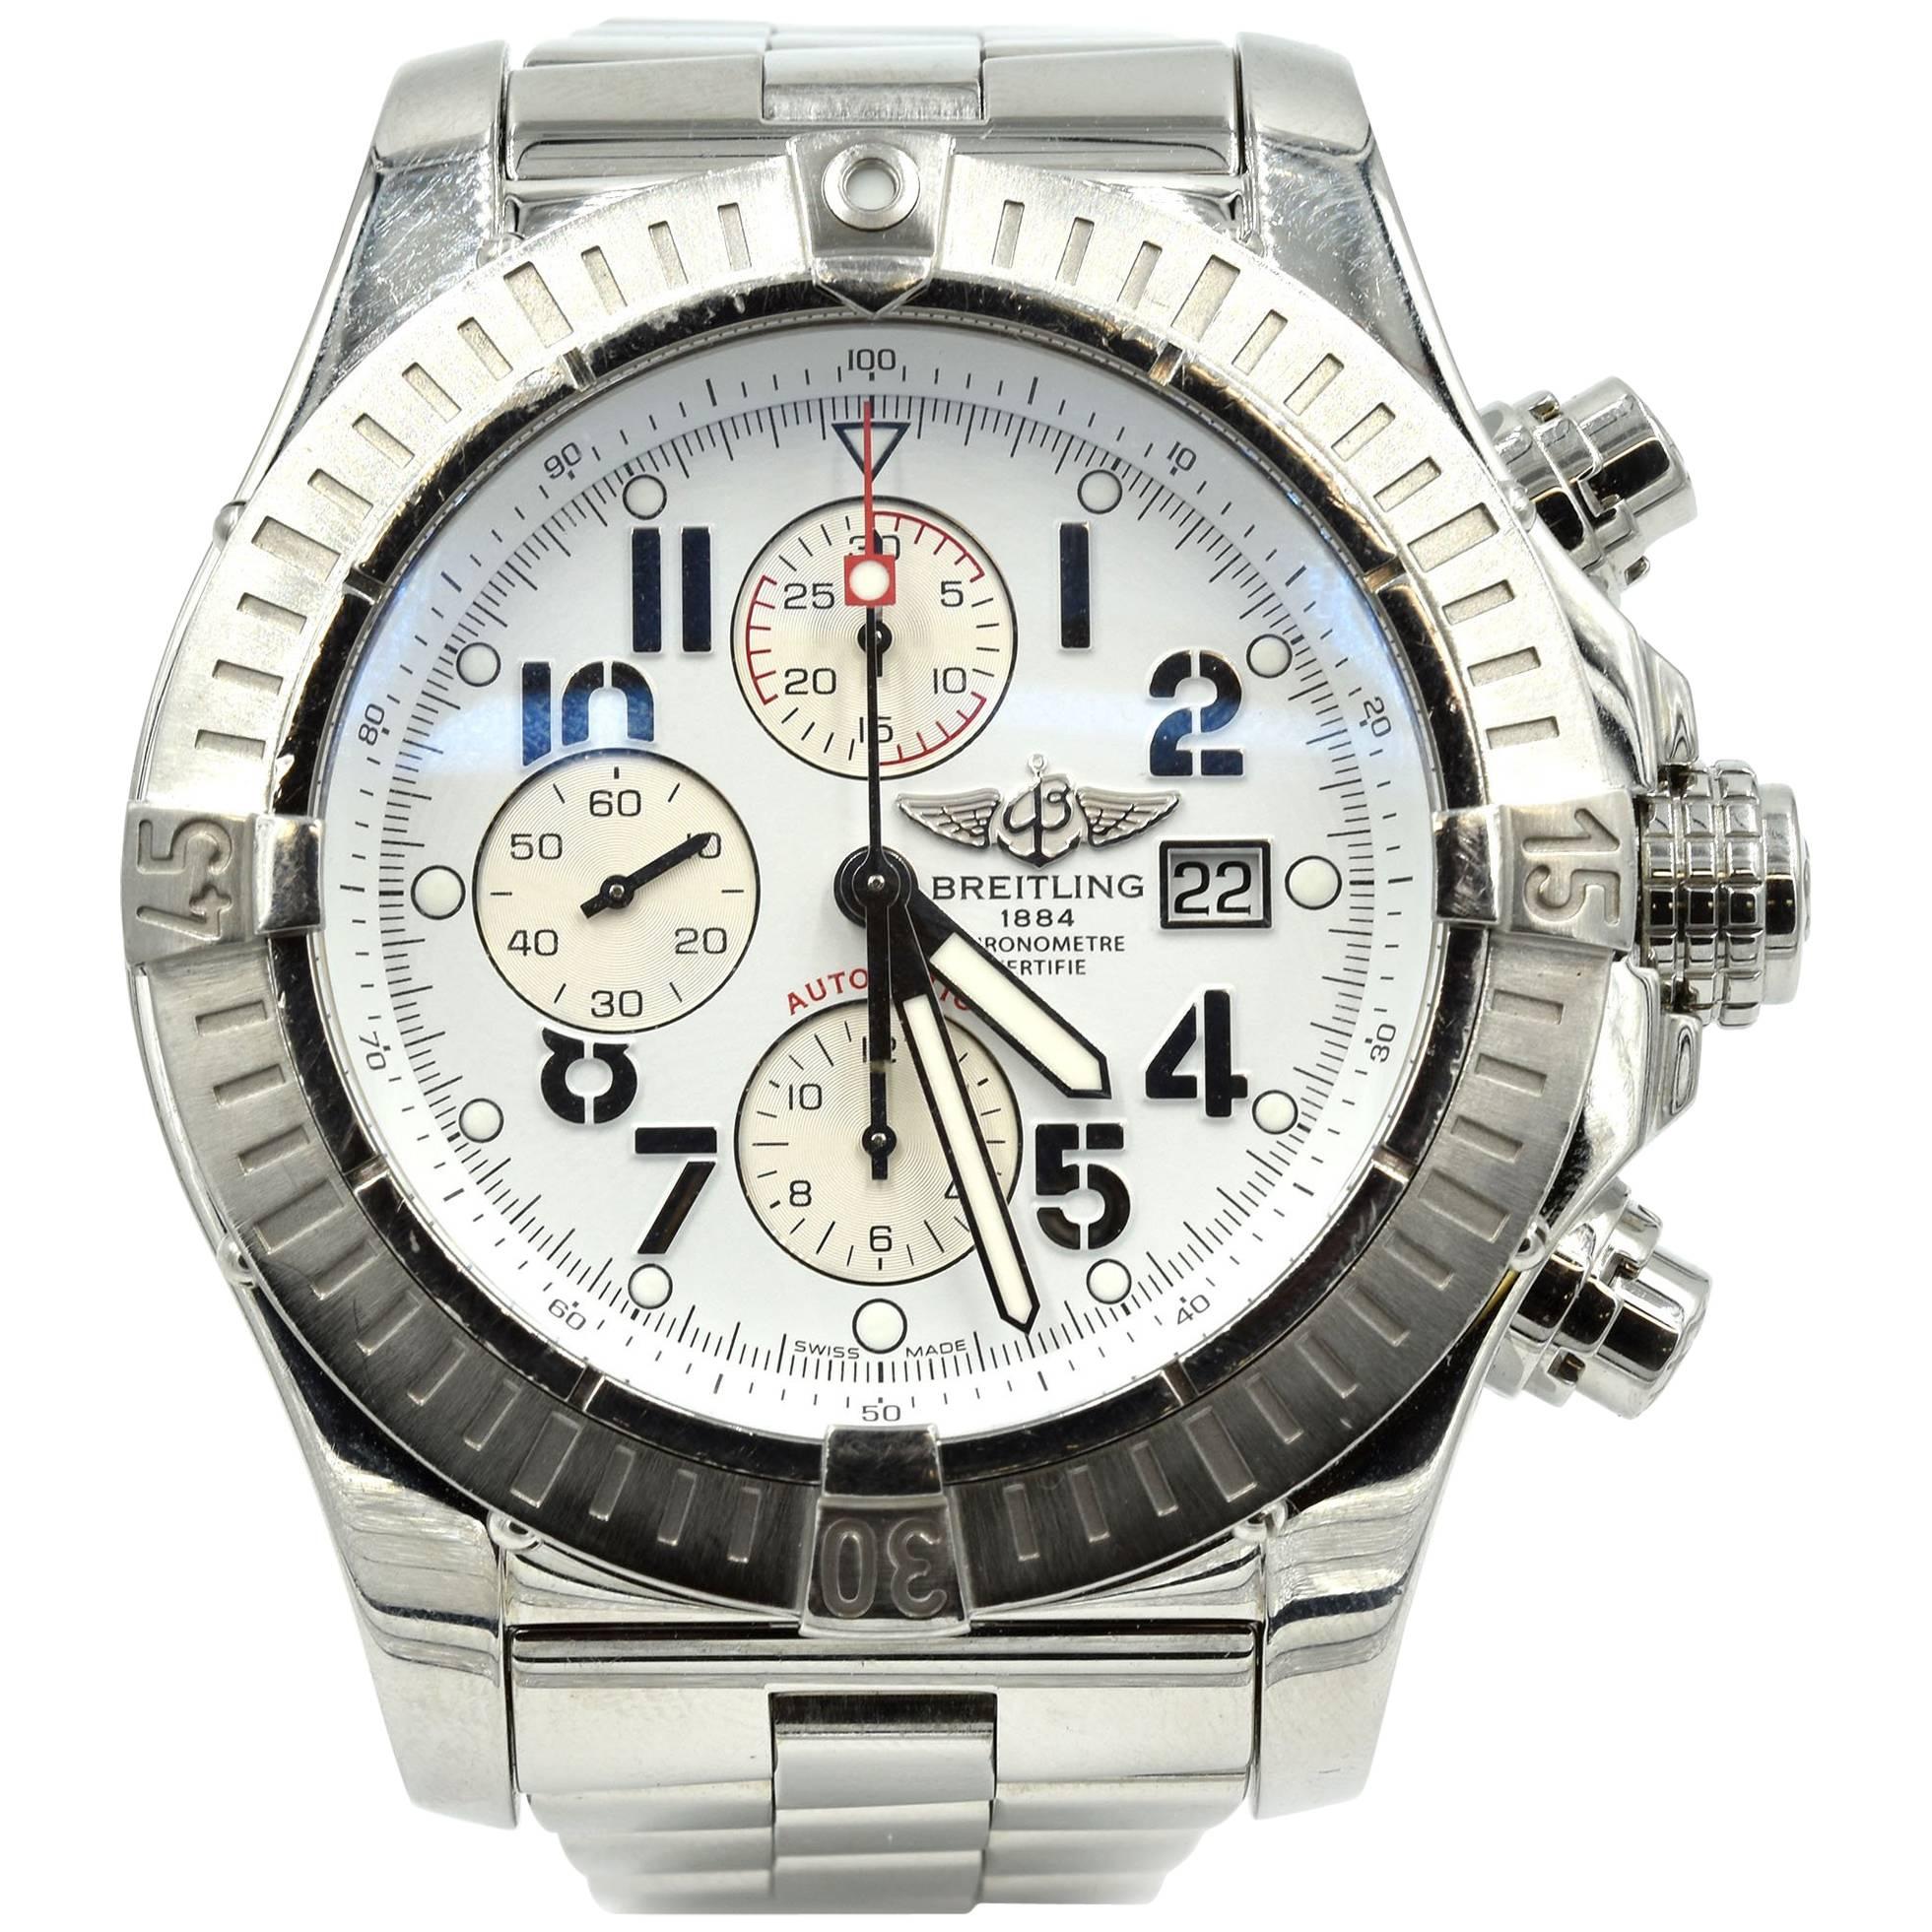 Breitling Stainless Steel Super Avenger Chronograph Wristwatch Ref A13370